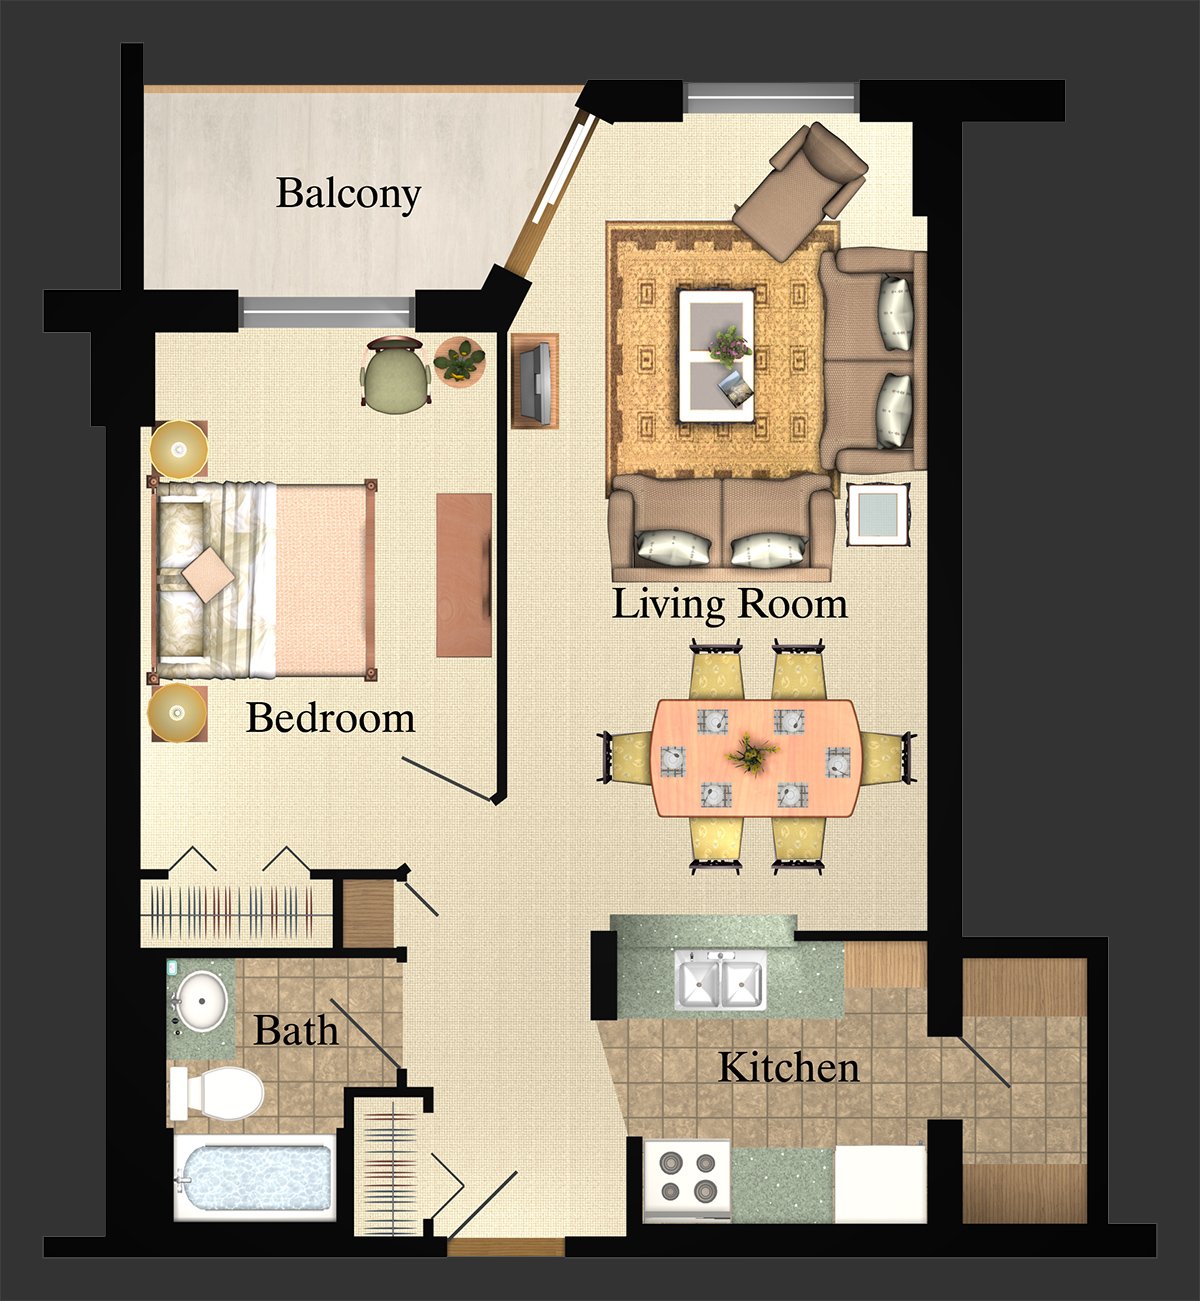 Layout for a 1 bedroom apartment for rent